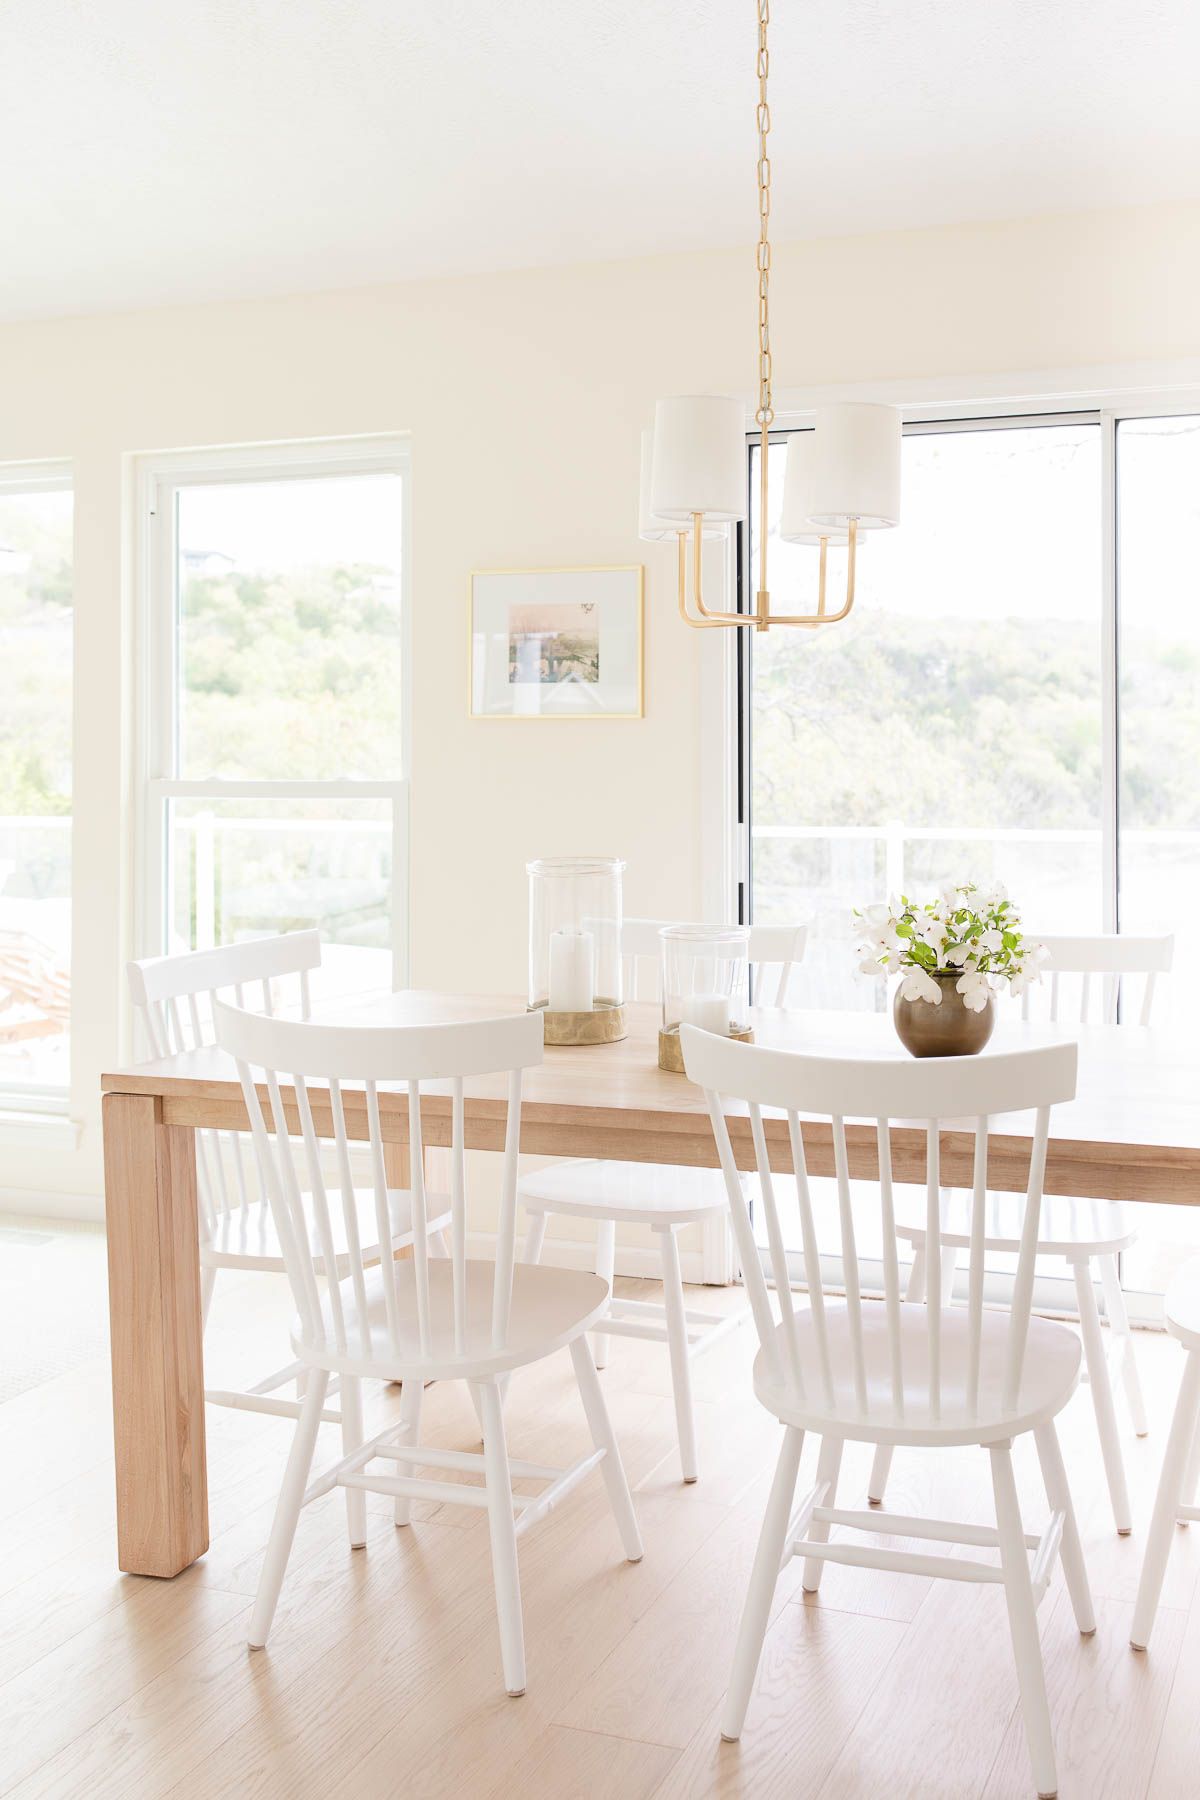 A white kitchen dining area with wide white oak floors.